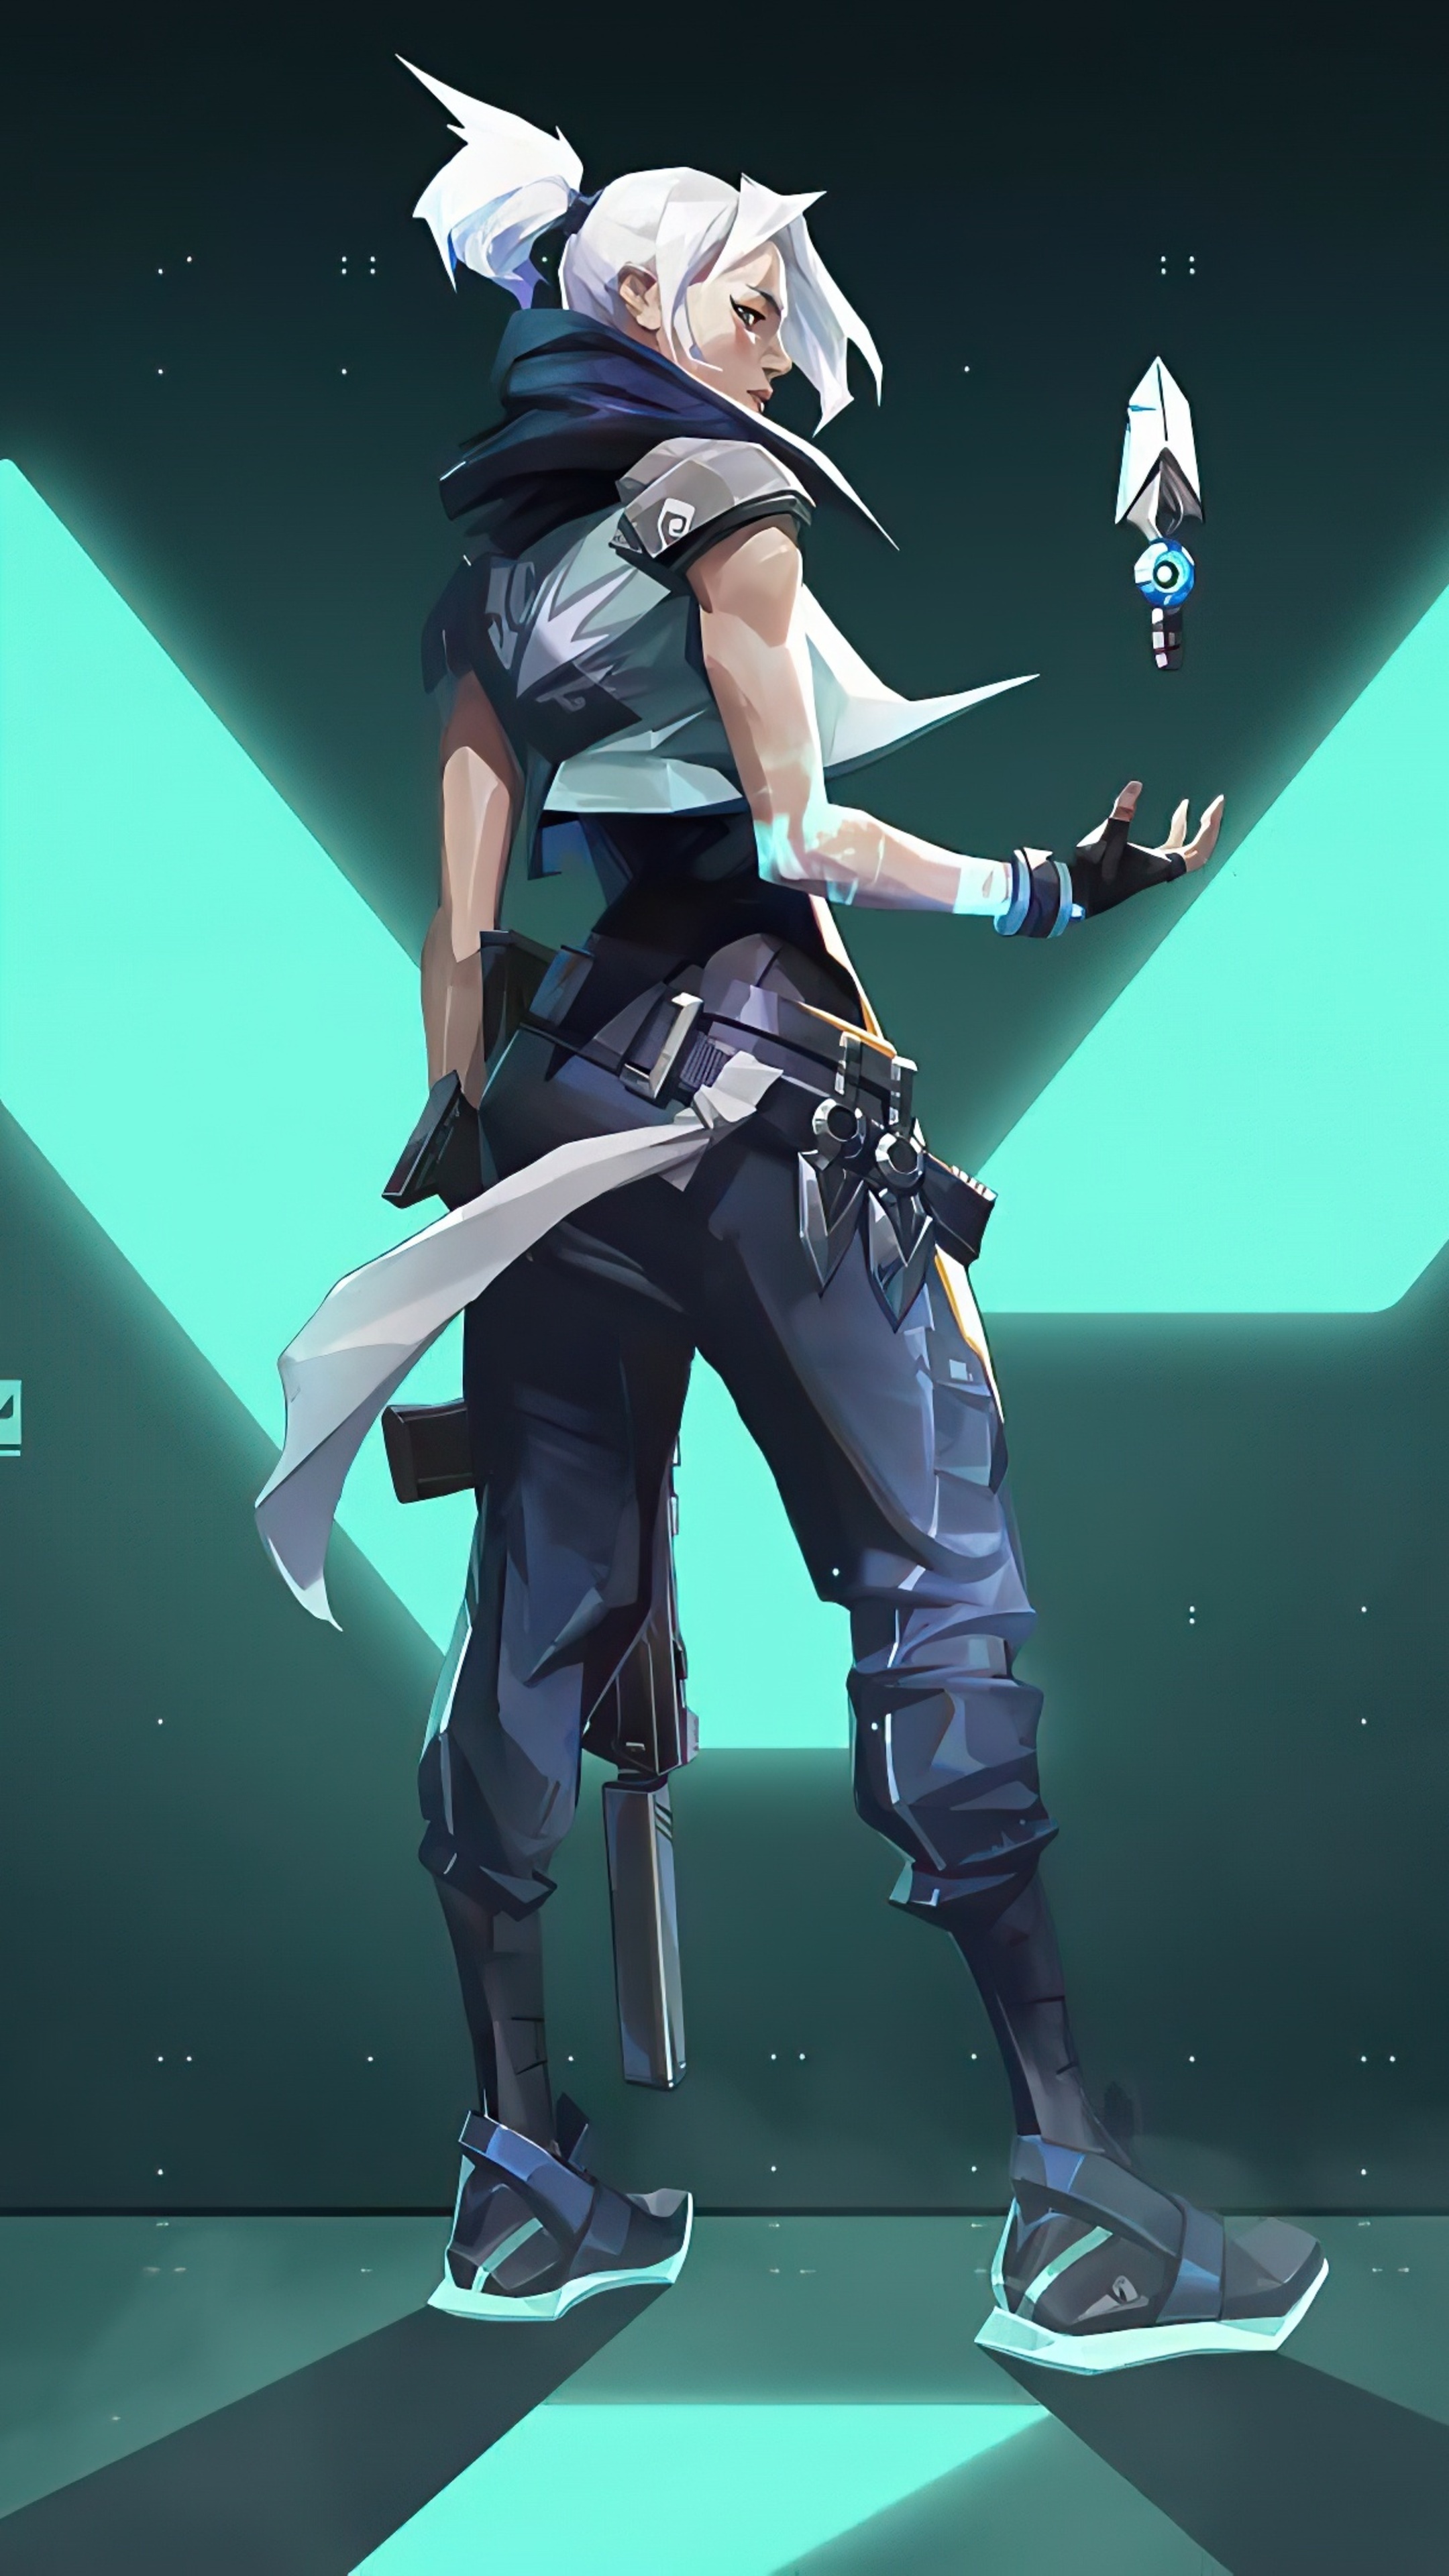 Jett's swift moves, Sony Xperia wallpapers, 4K gaming visuals, Game character portraits, 2160x3840 4K Phone